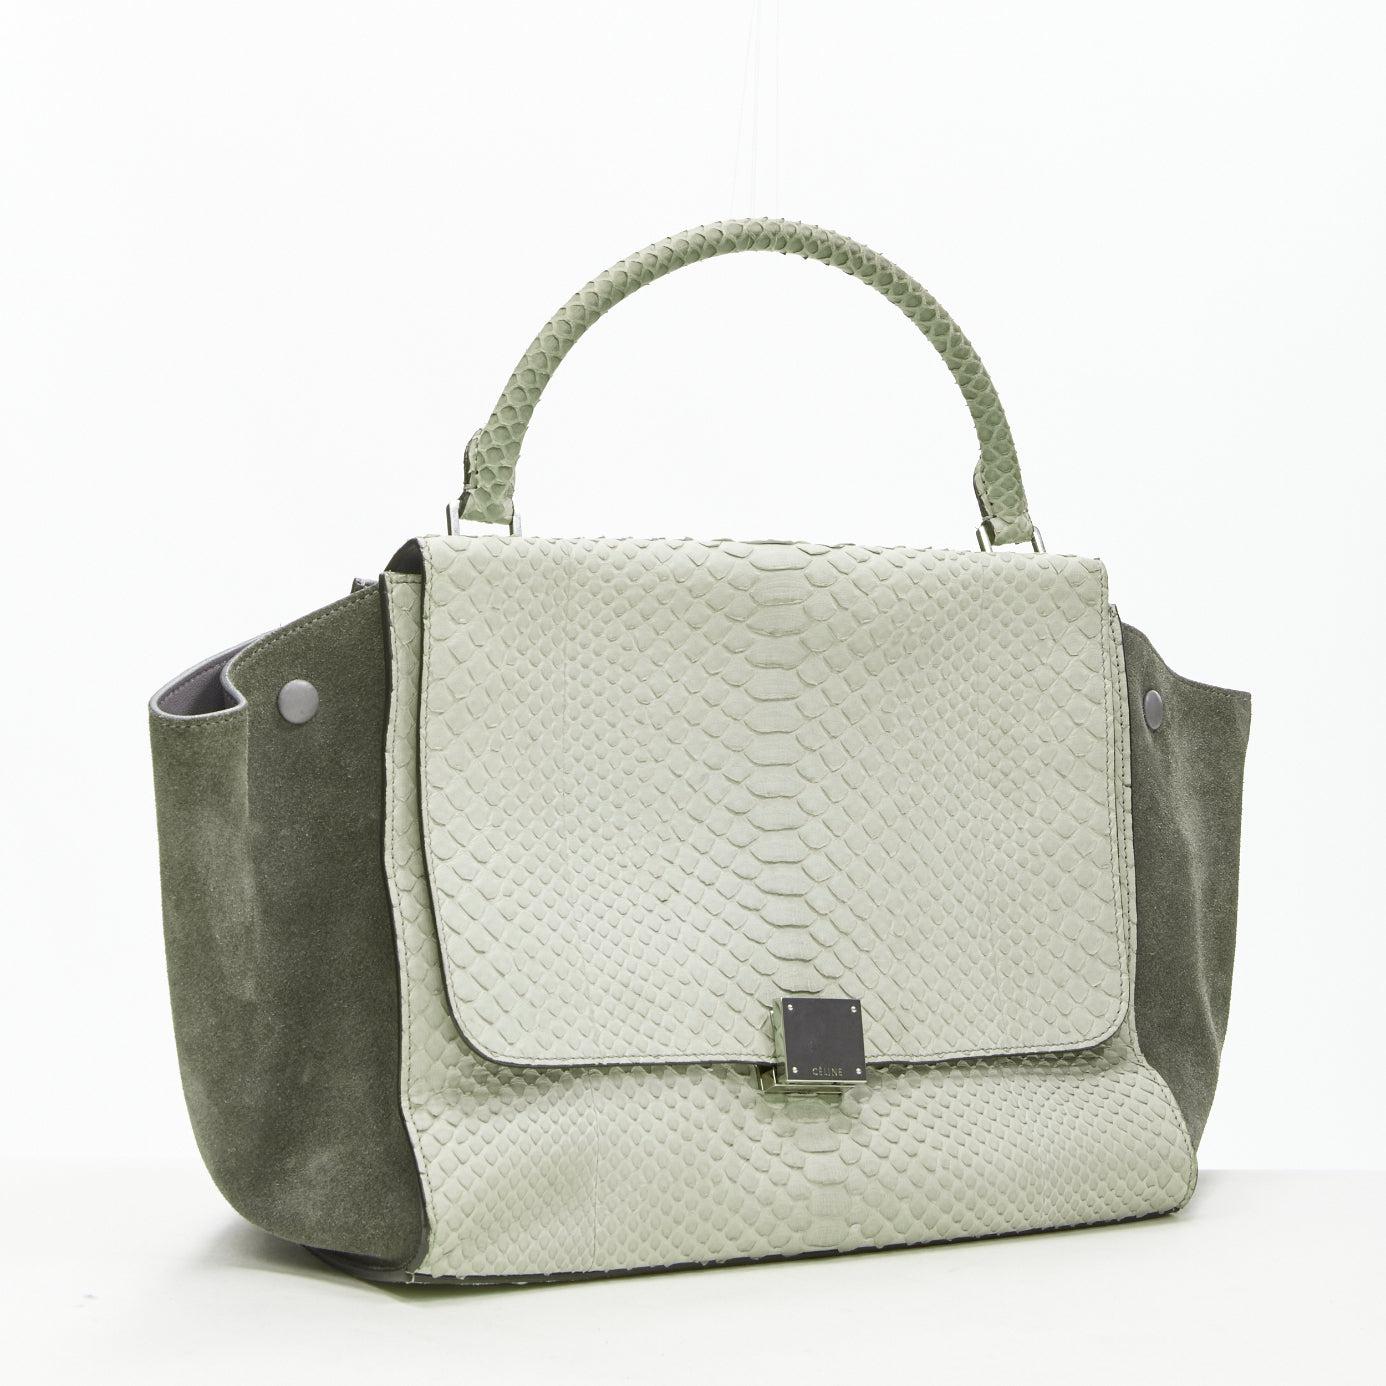 CELINE Phoebe Philo Trapeze grey scaled leather suede flared flap satchel bag
Reference: VACN/A00032
Brand: Celine
Designer: Phoebe Philo
Model: Trapeze
Material: Leather, Suede
Color: Grey
Pattern: Solid
Closure: Lock
Lining: Leather
Extra Details: